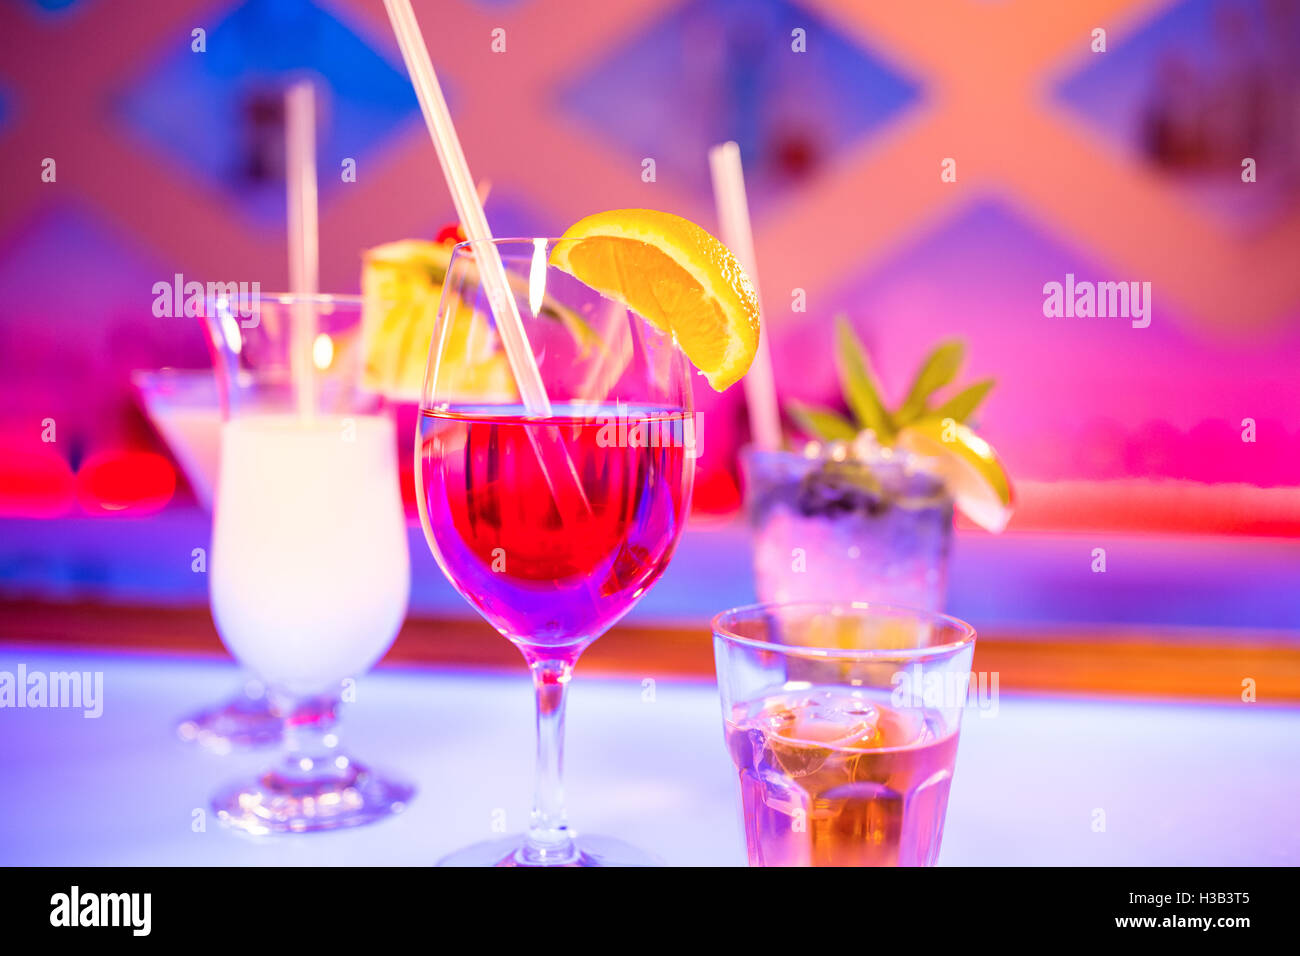 Glasses of drink on bar counter Stock Photo